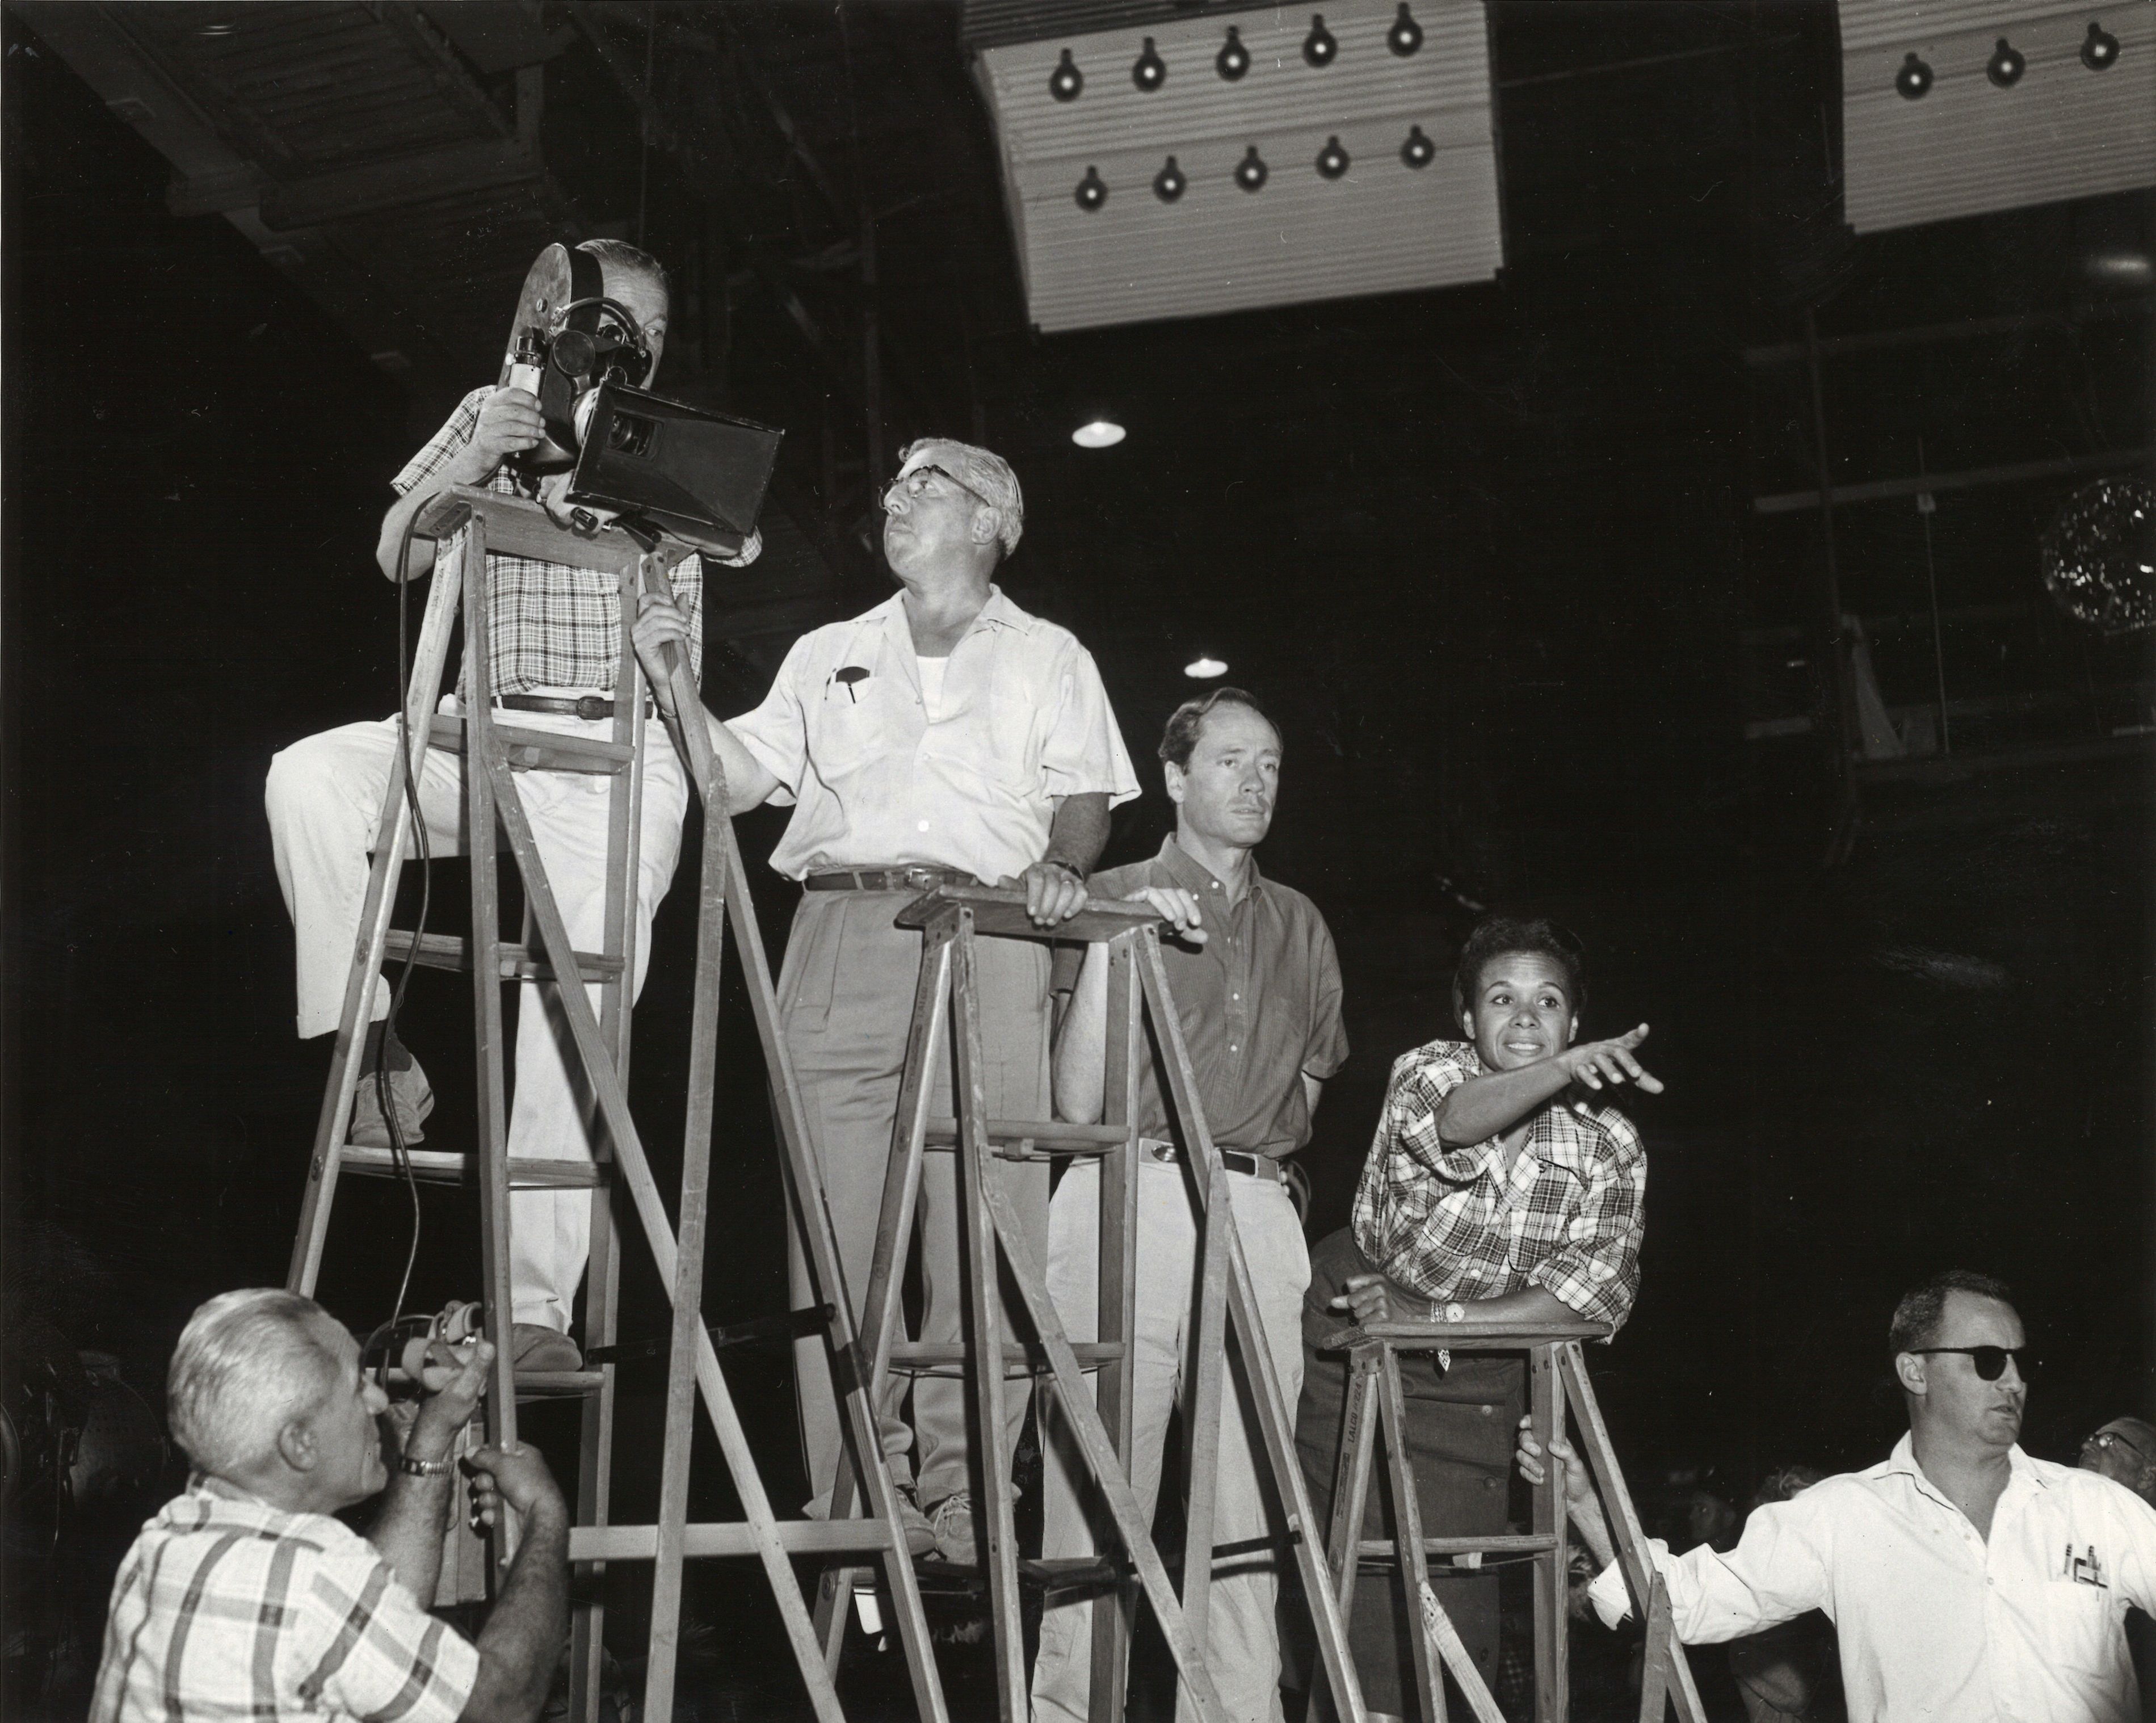 Dunham points as she stands atop a wooden latter. A white man follows her gaze, while a camera operator balances on a taller ladder, pointing the camera in the same direction.